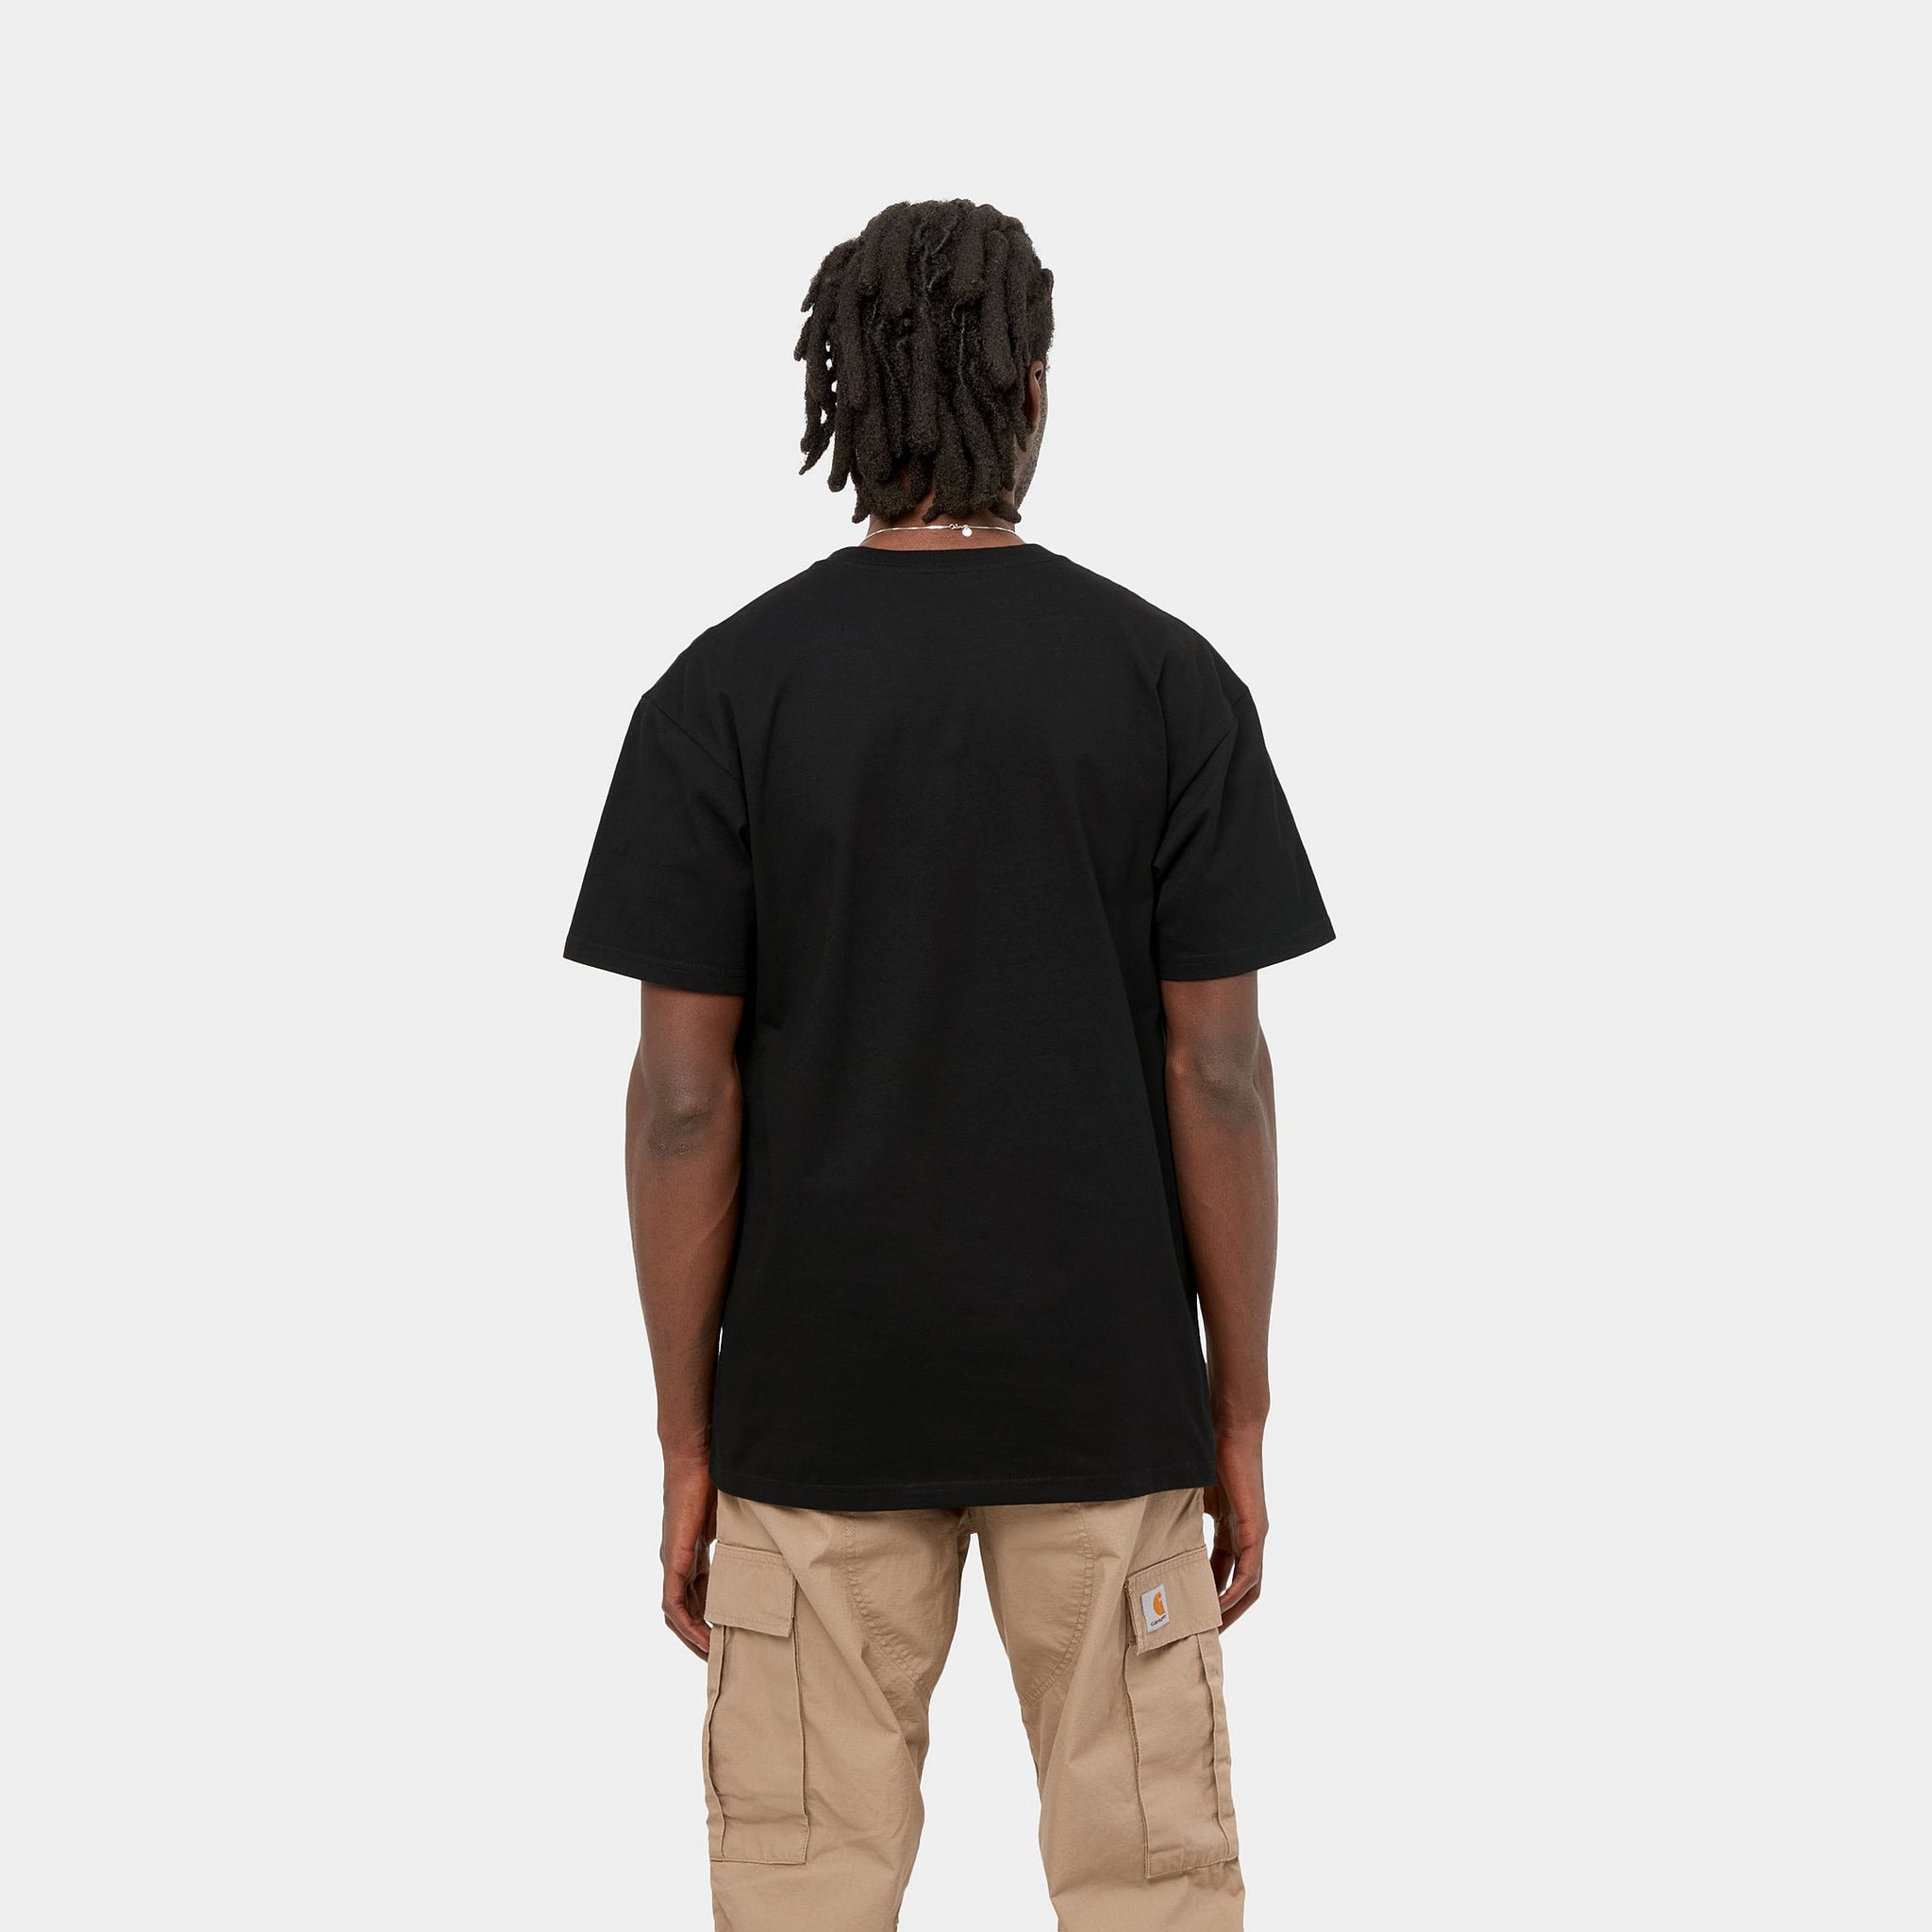 Carhartt WIP S/S Chase T-Shirt (Black / Gold)